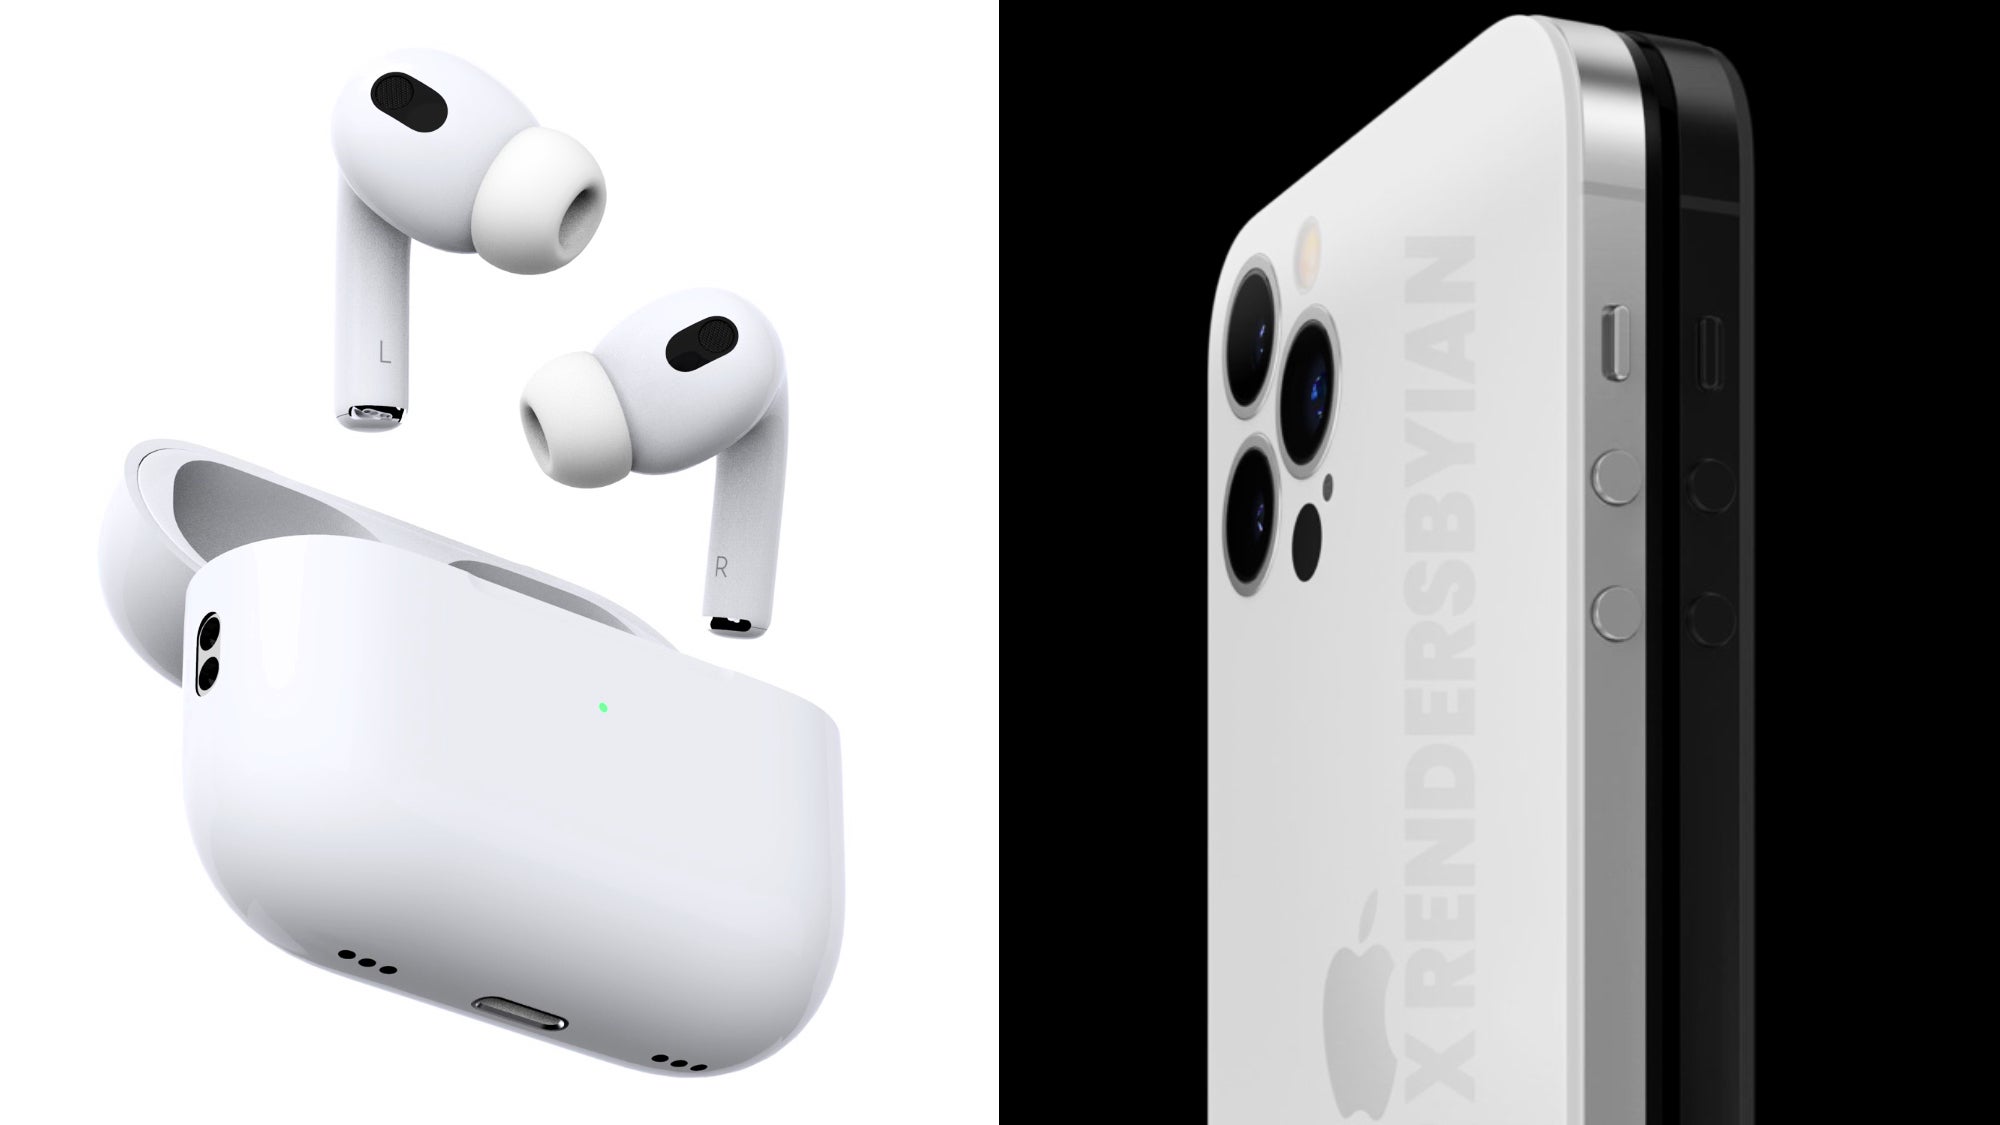 The new AirPods Pro 2 according to 52audio. - Apple’s total USB-C transition begins: New AirPods Pro 2 now, iPhone 15 to follow (Apple’s plan)